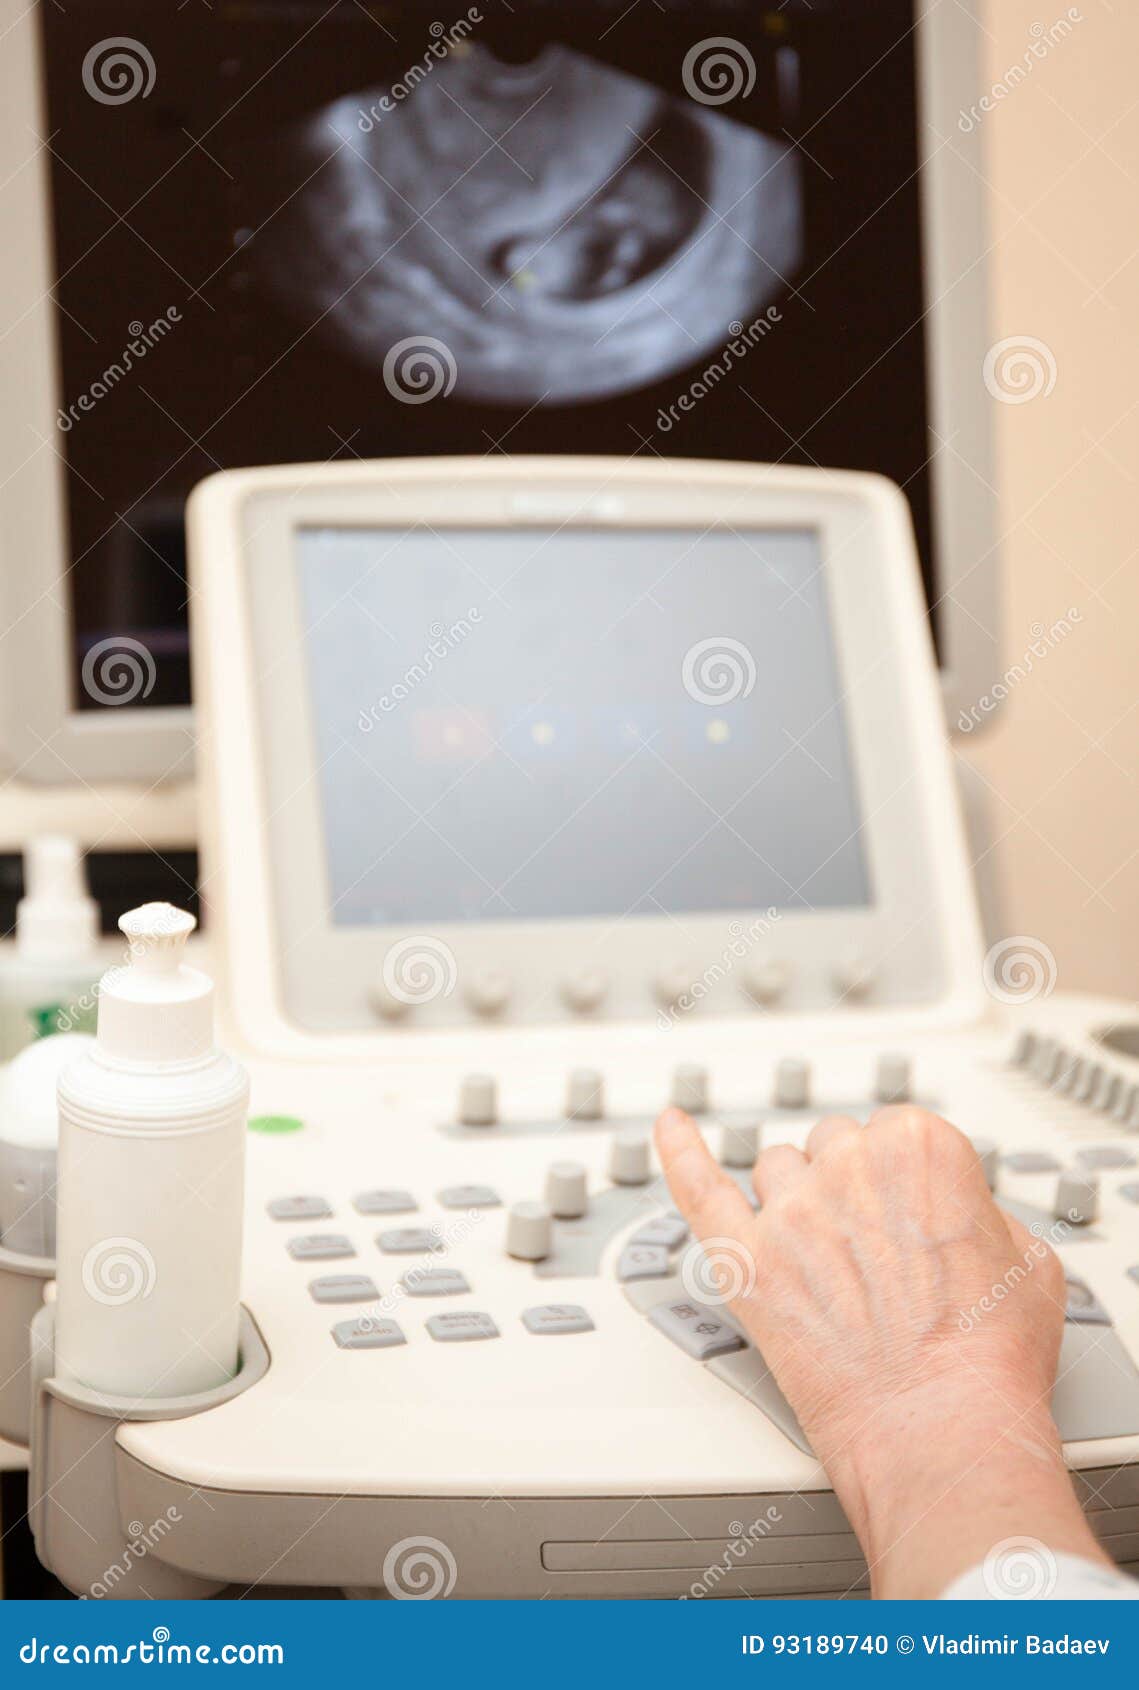 Specialized Gyno Exam - Doctor Performing An Ultrasound Examination Stock Photo ...